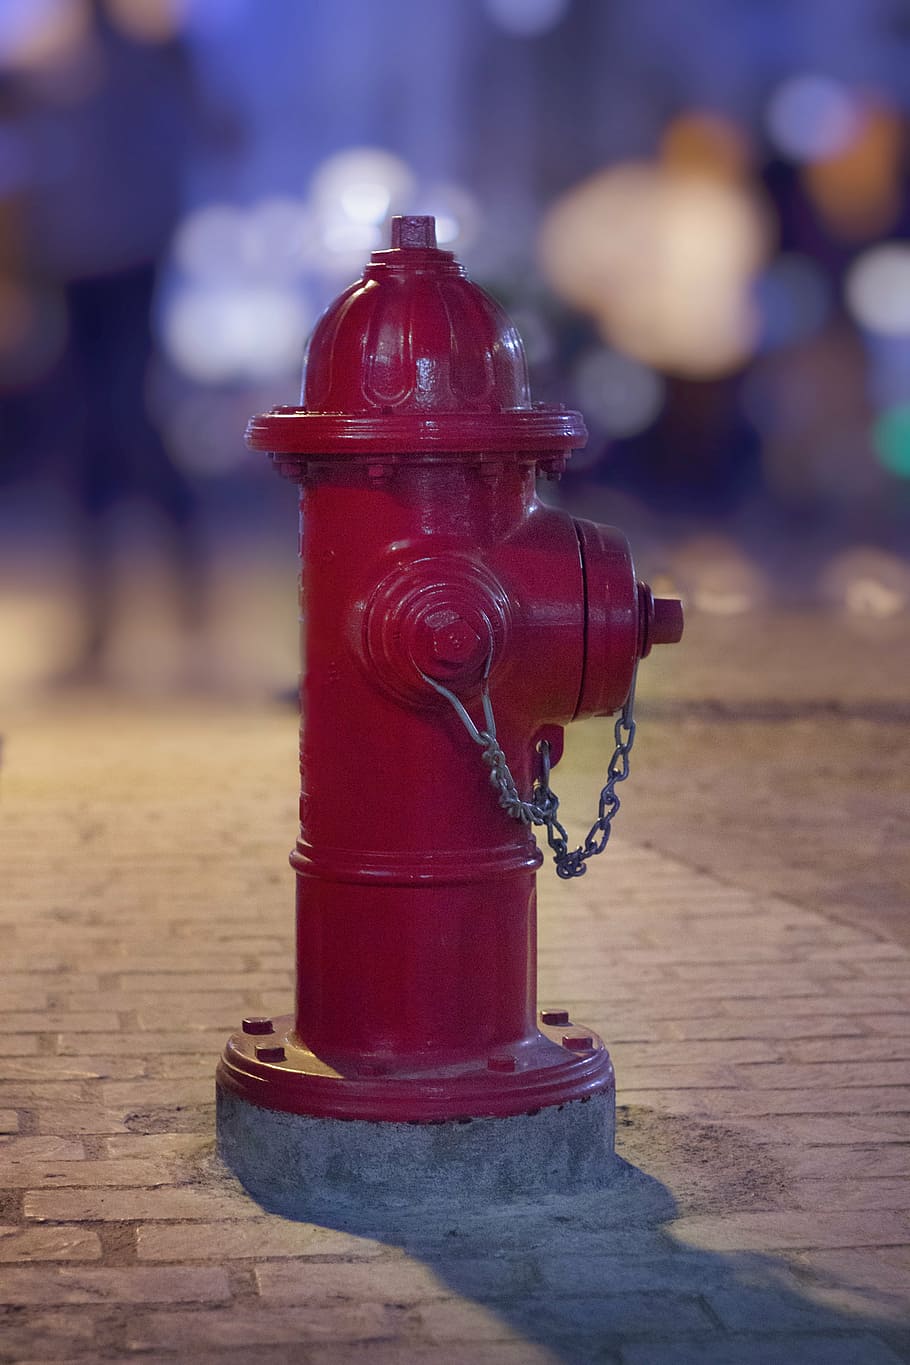 red, water, bokeh, 50mm, wallpaper, screen, focus on foreground, fire hydrant, metal, safety